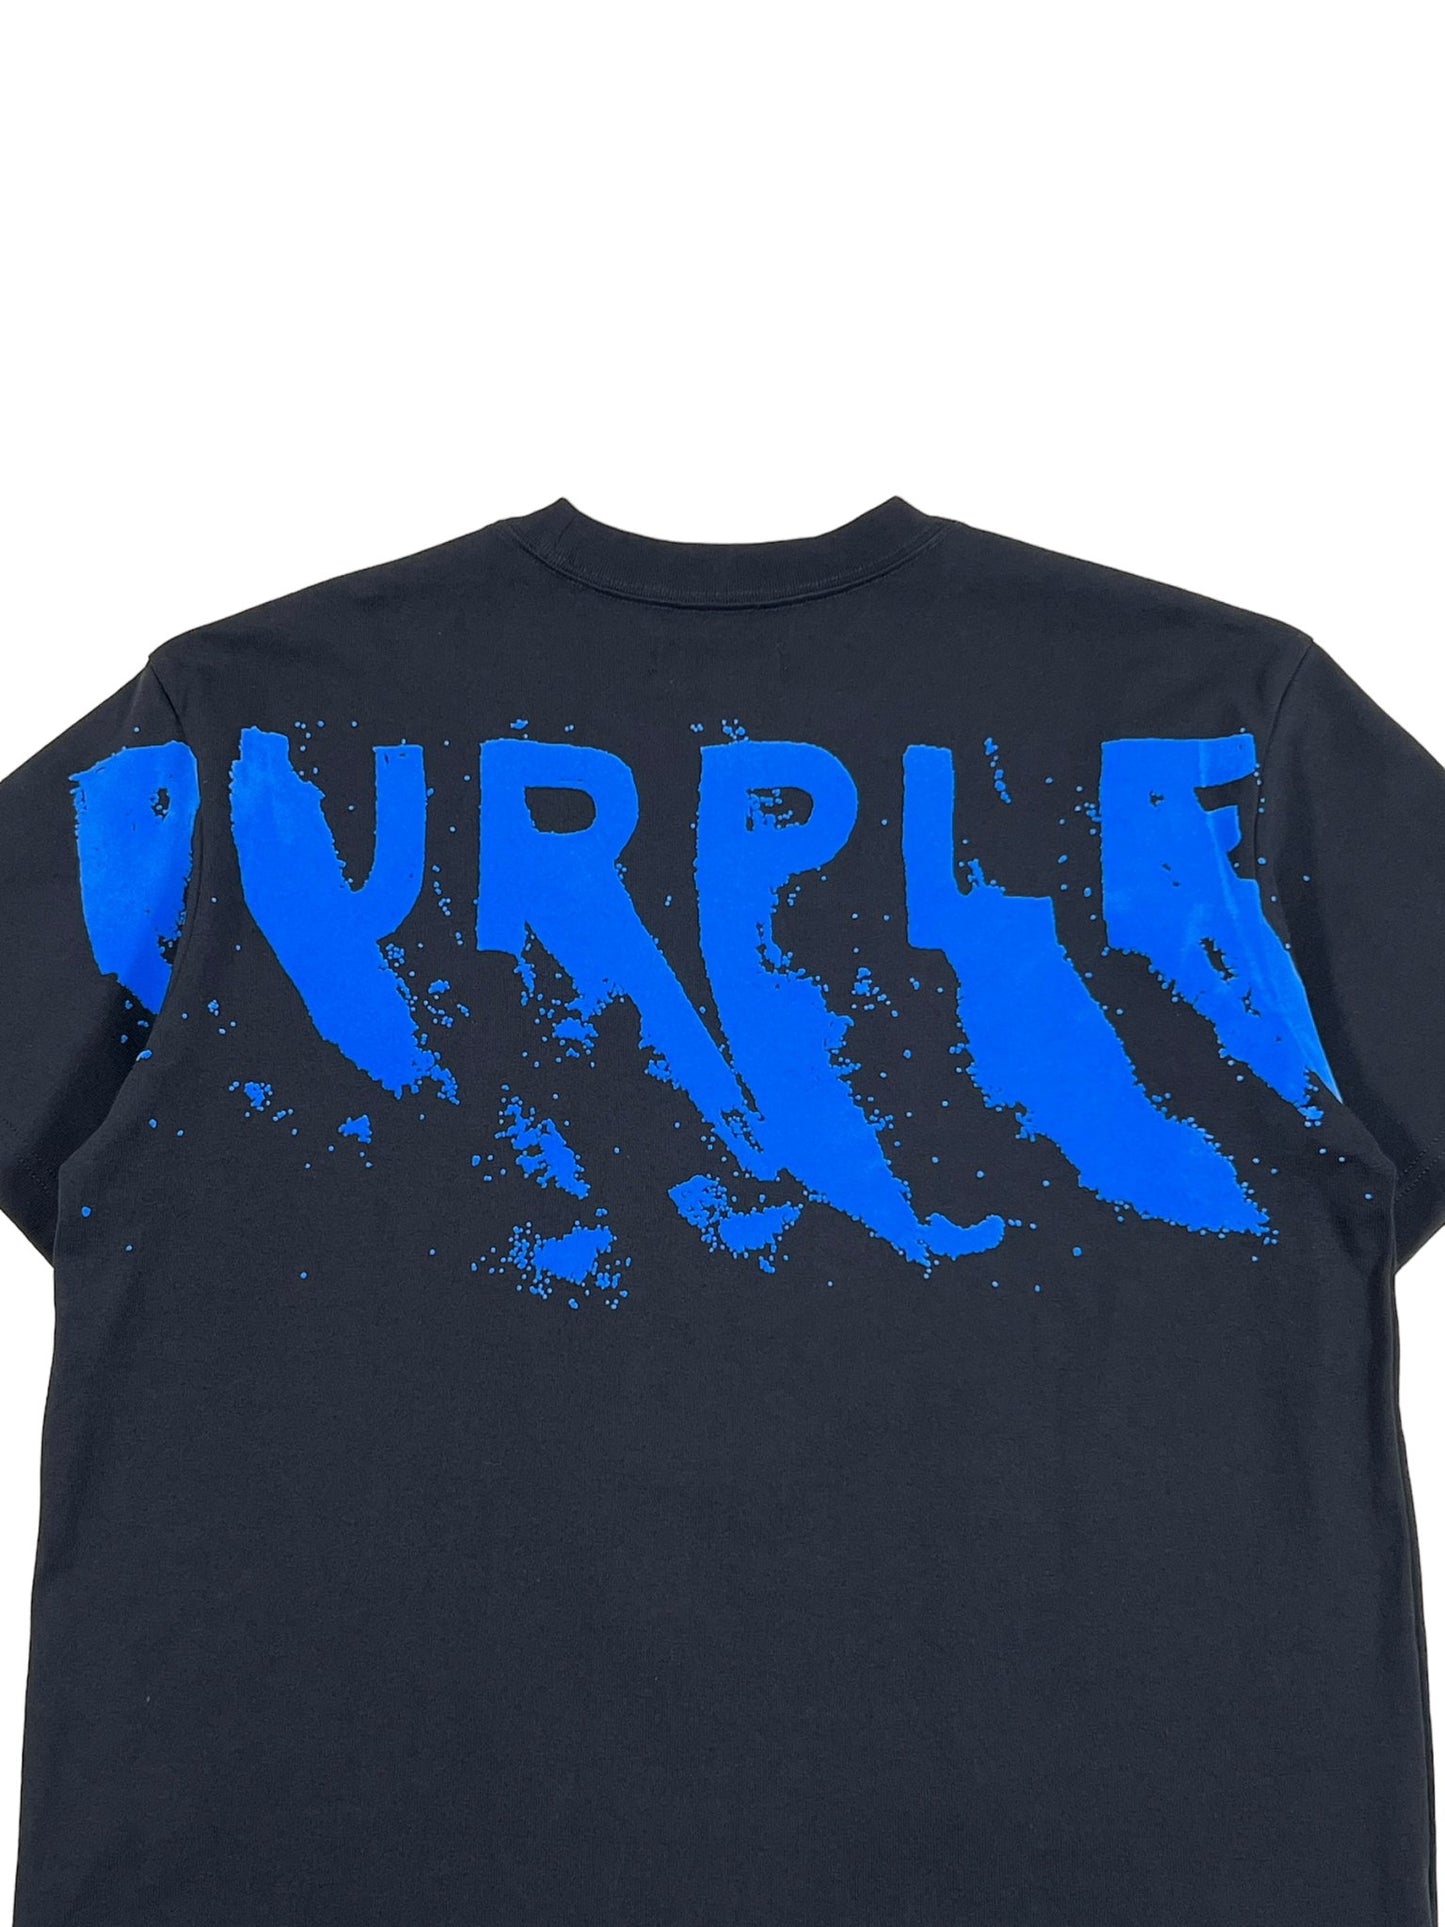 Navy t-shirt with the word "purple" splashed across in bold blue paint, featuring PURPLE BRAND graphic.